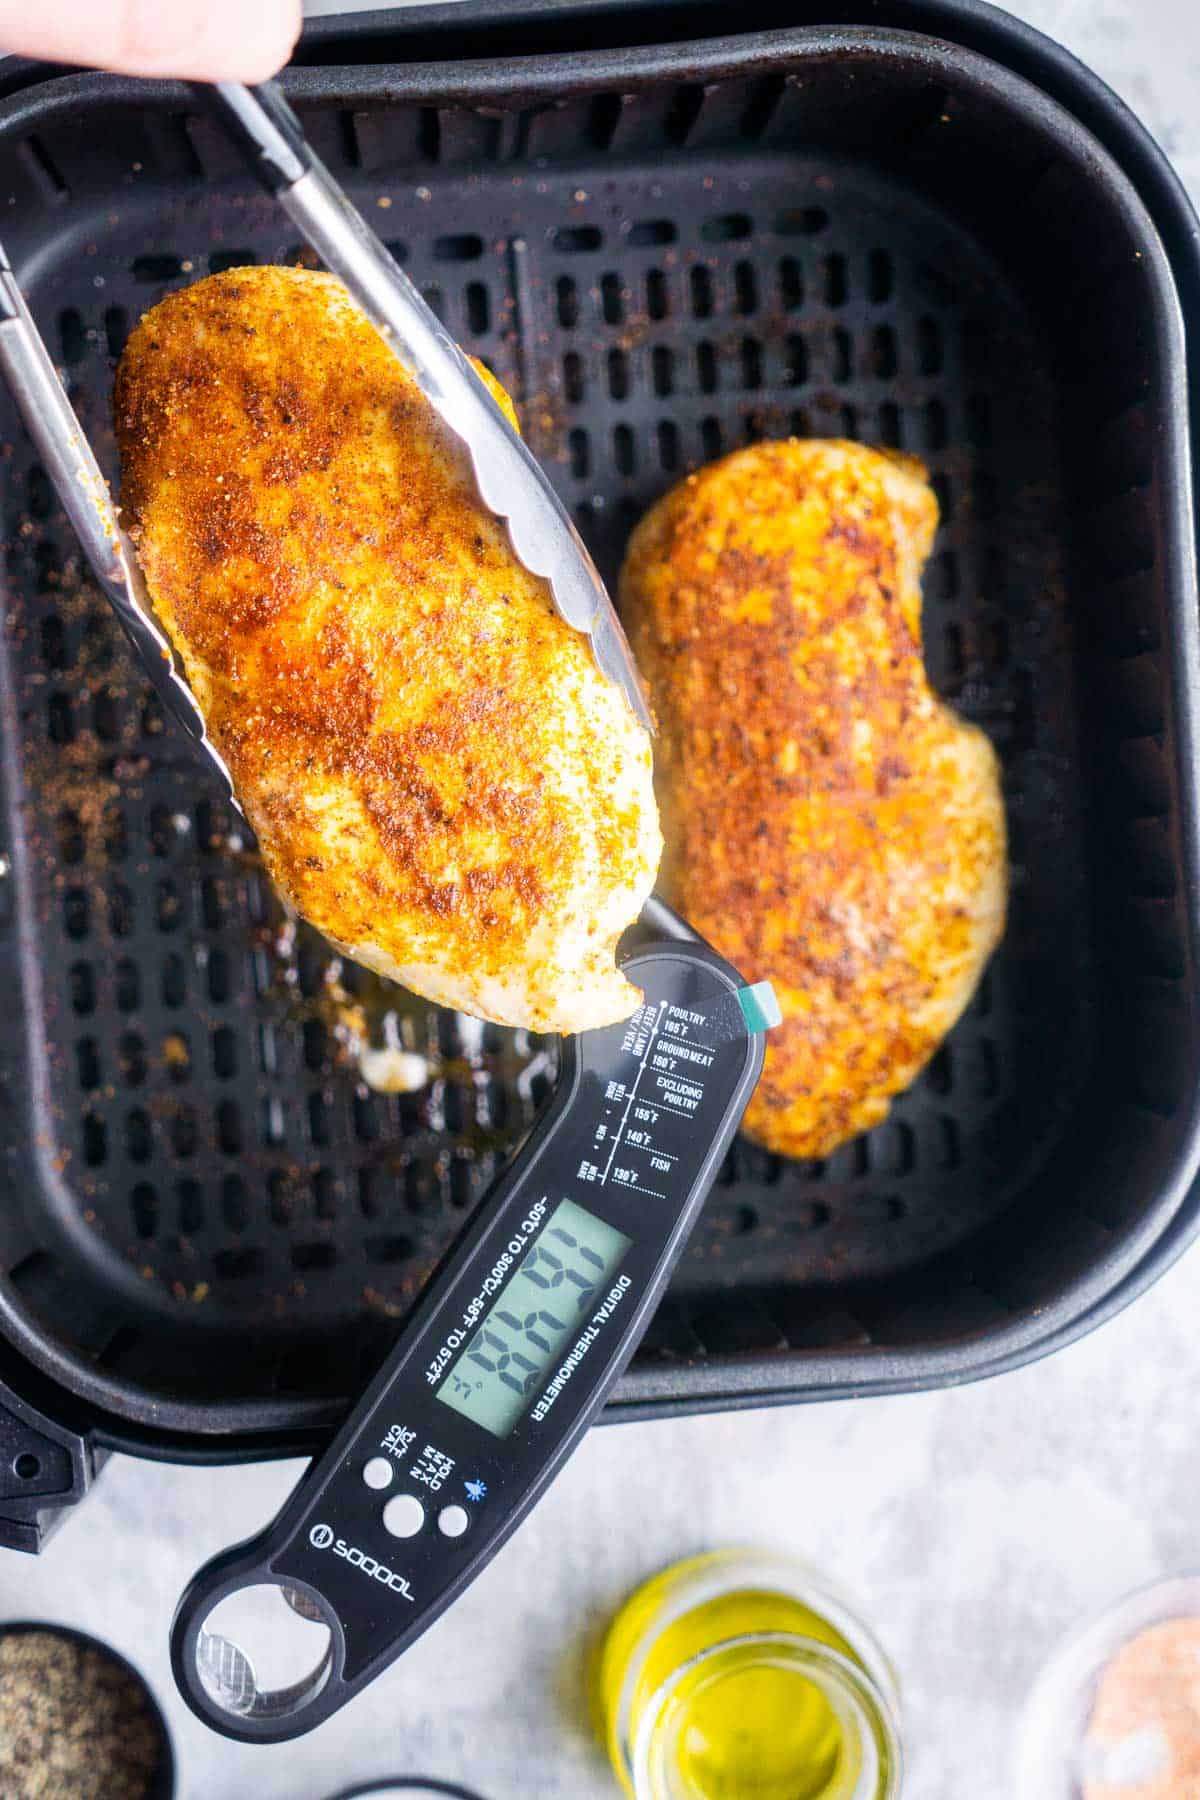 Checking the internal temperature of an air fryer chicken breast